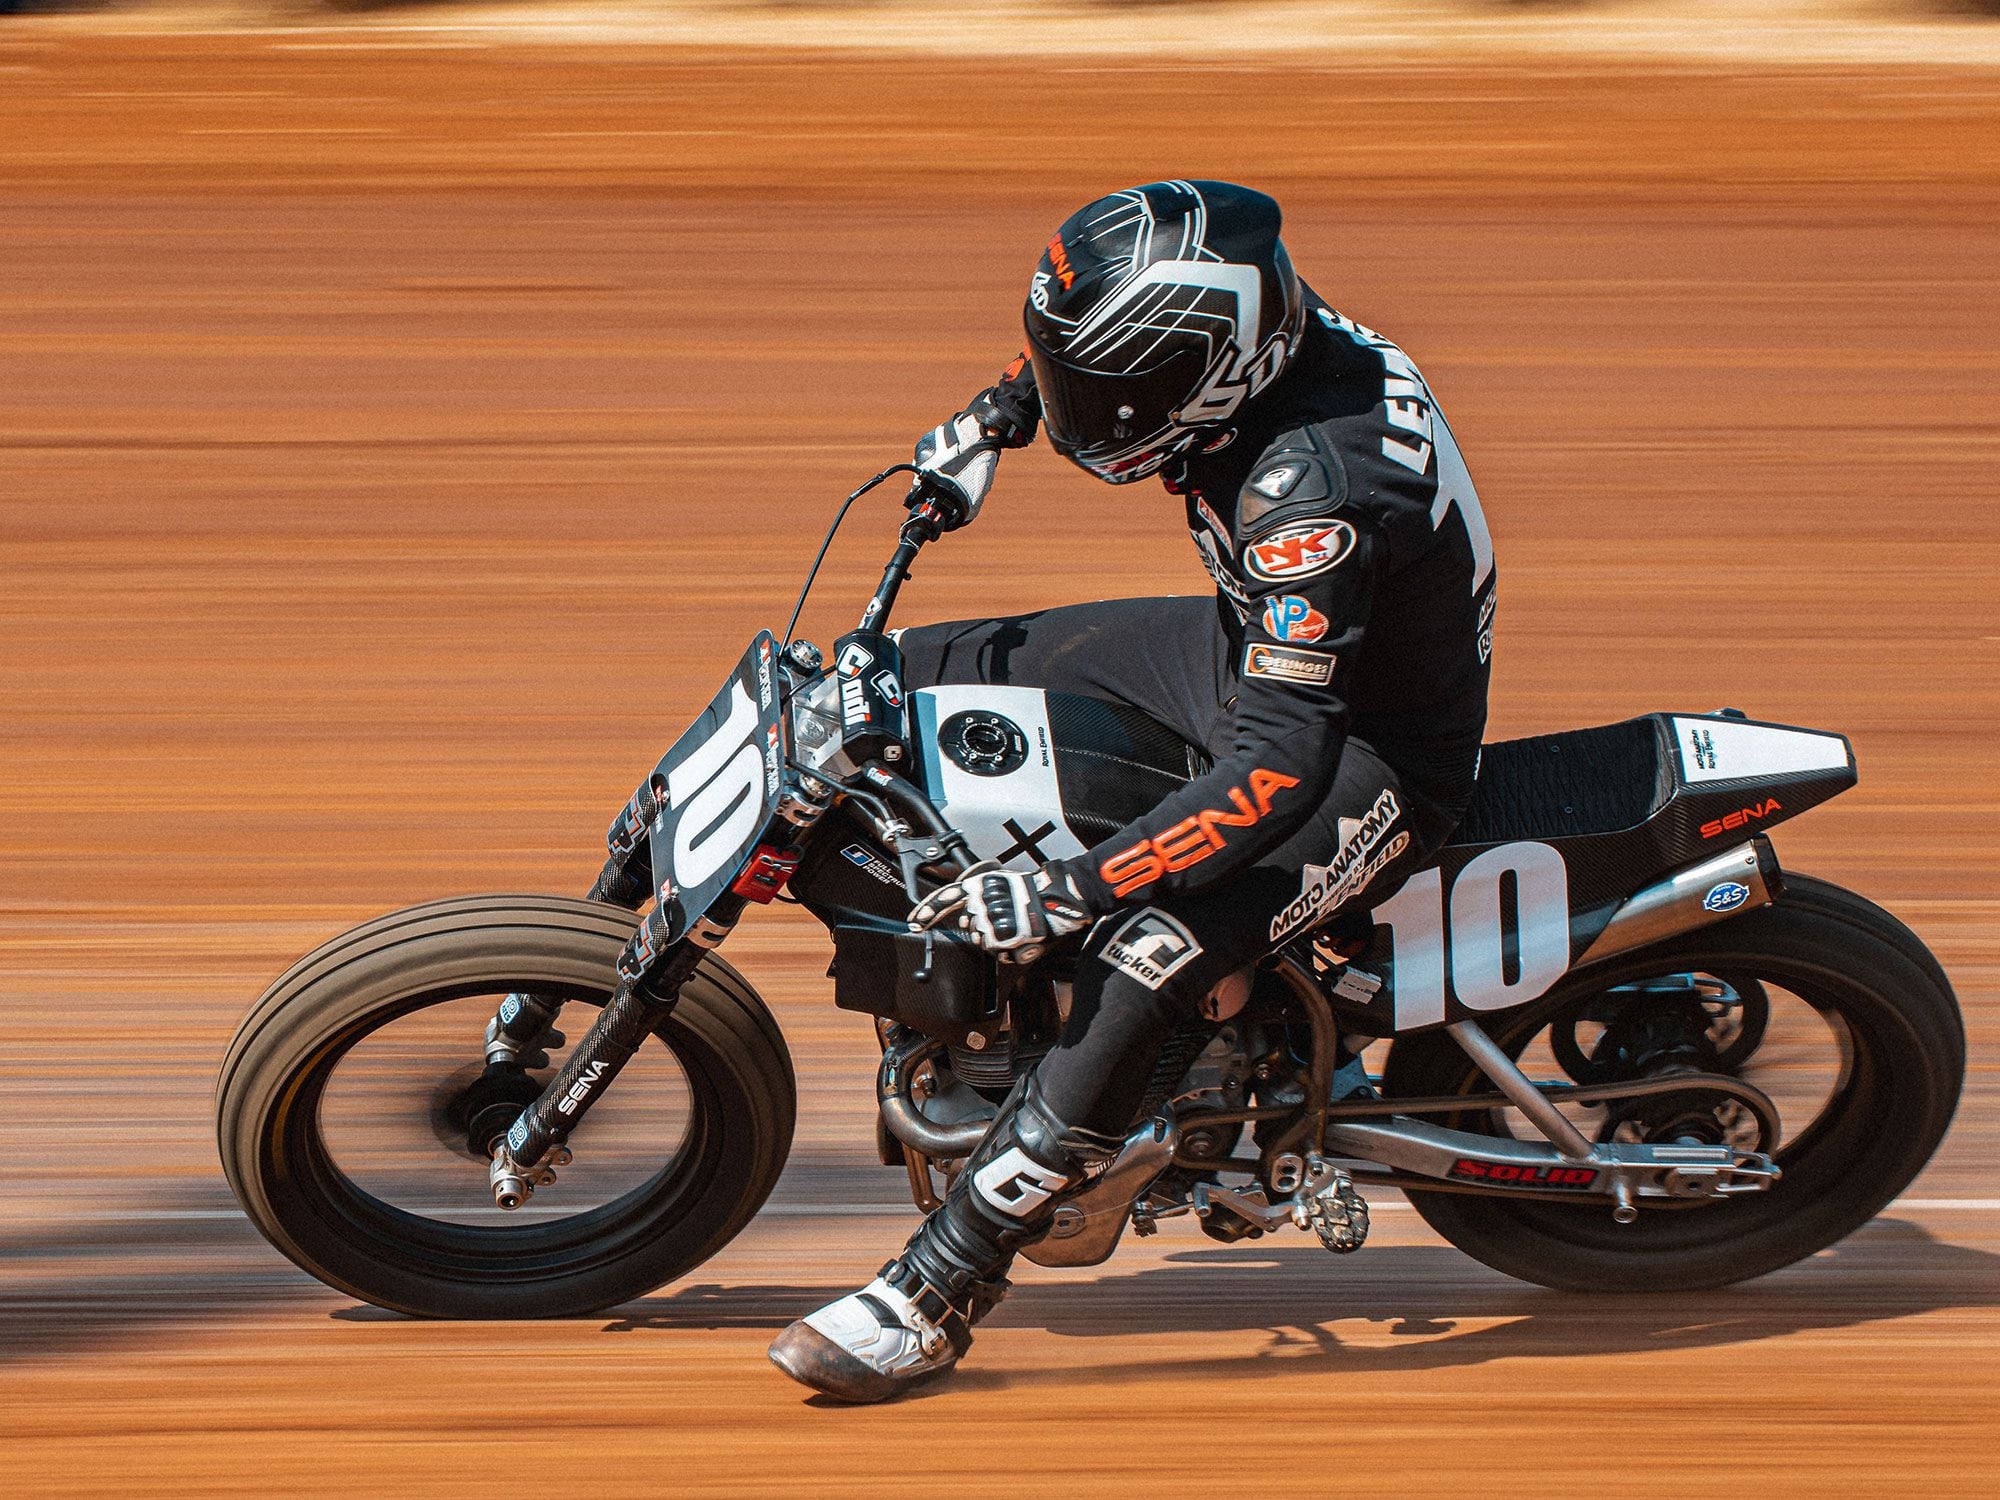 Royal Enfield takes its twin to dirt track